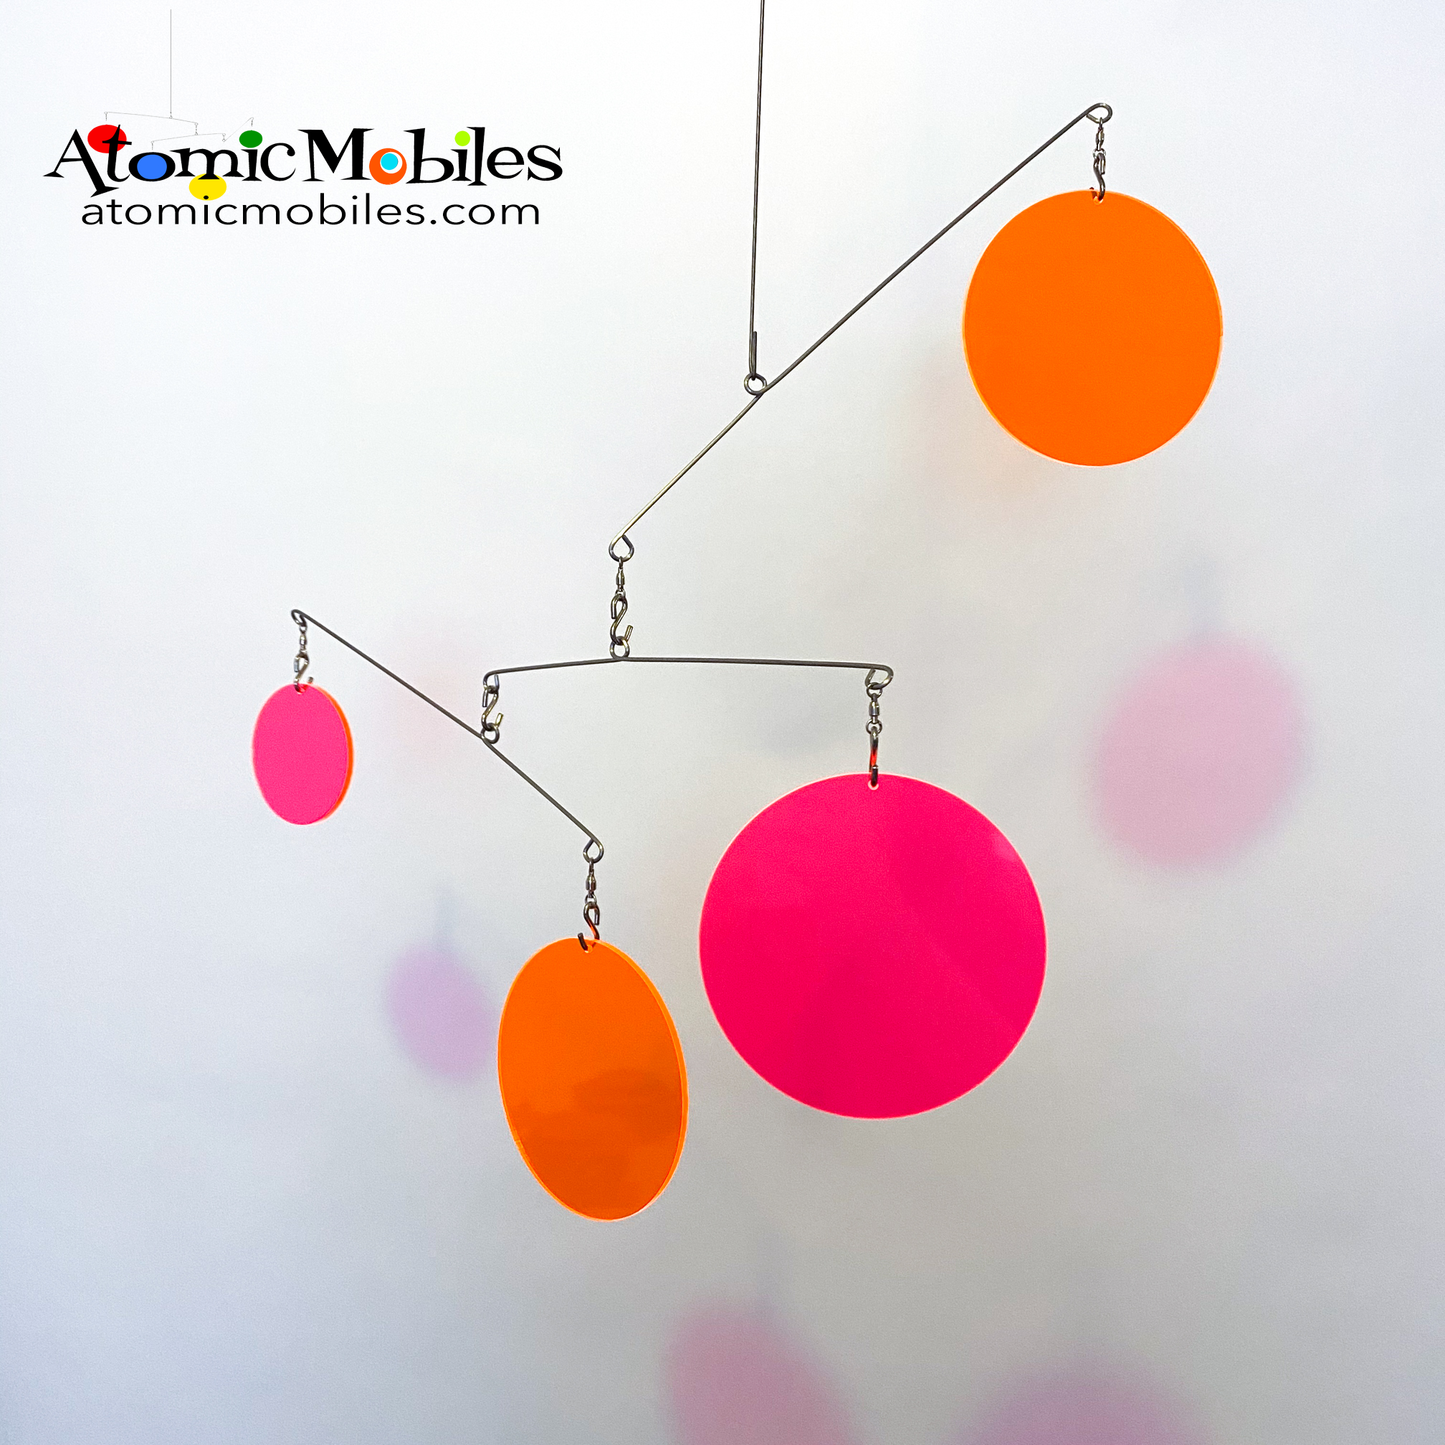 Neon Fluorescent Retro Hot Pink and Orange Atomic Mobile -  hanging modern kinetic art mobiles by AtomicMobiles.com